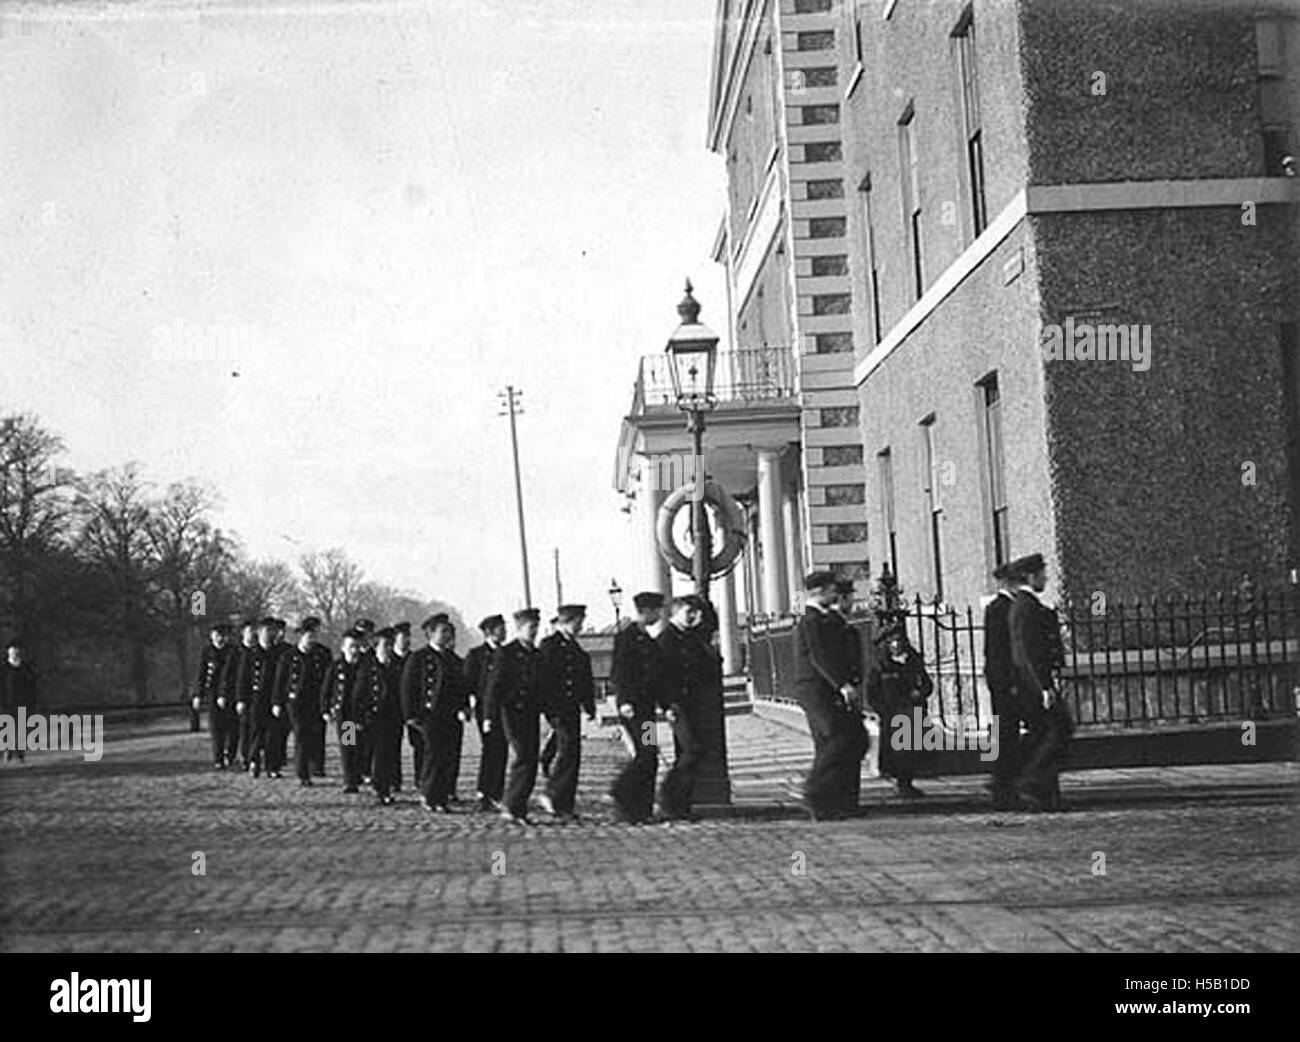 1 Group of boys in uniform marching at the corner of Portobello and ...